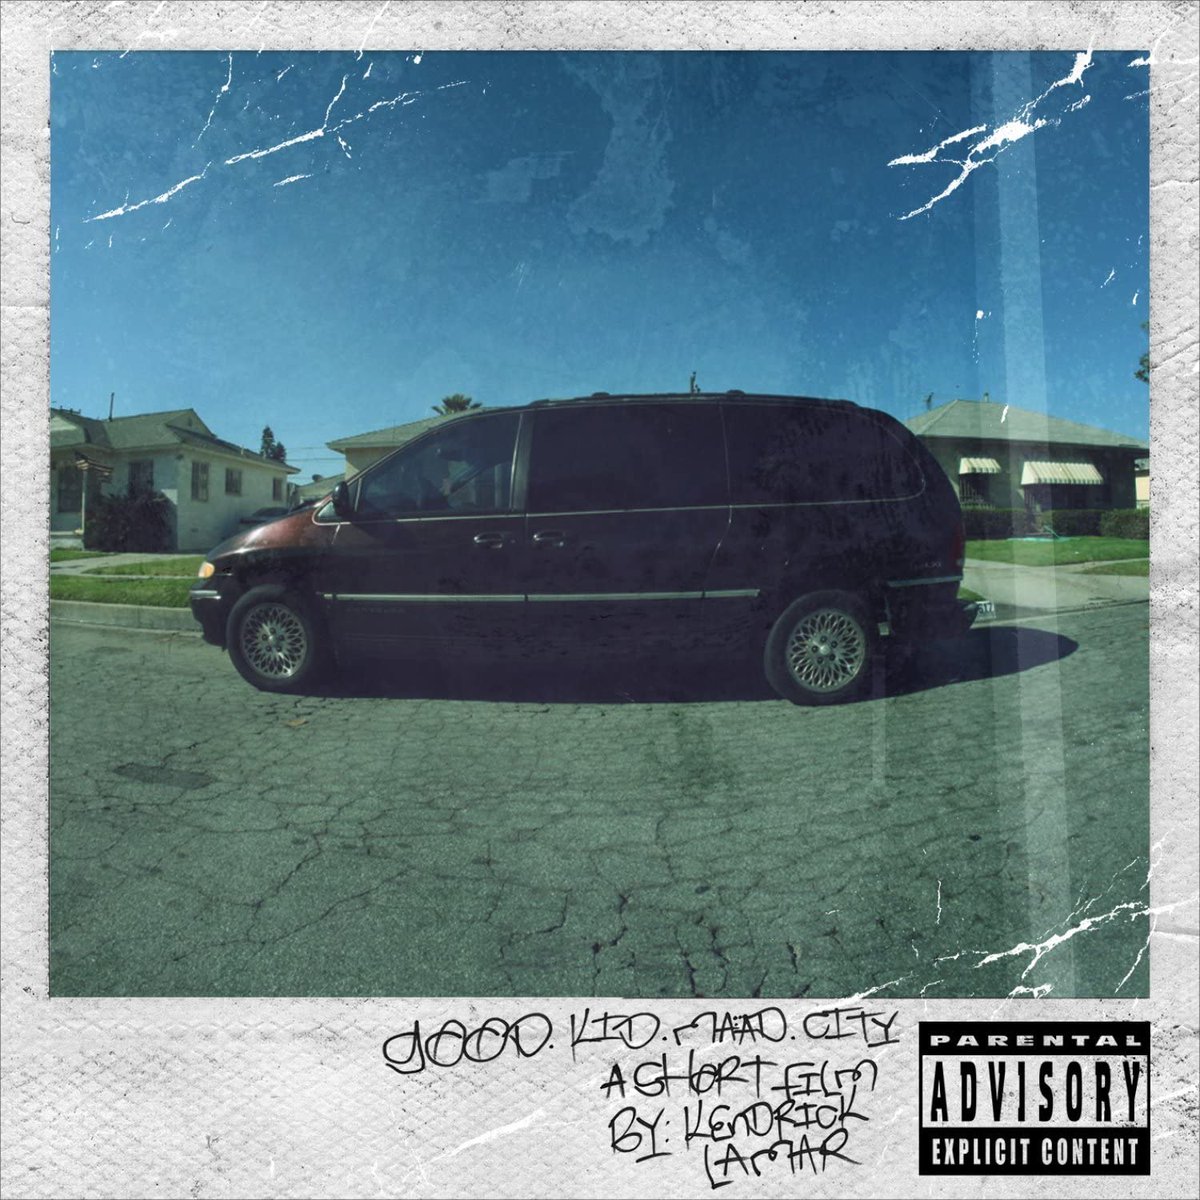 Here we are. 2013. Kendrick drops his first major label studio album, good kid, m.A.A.d city. Personally this is one of my favorite albums of all time - the replay value is insane!